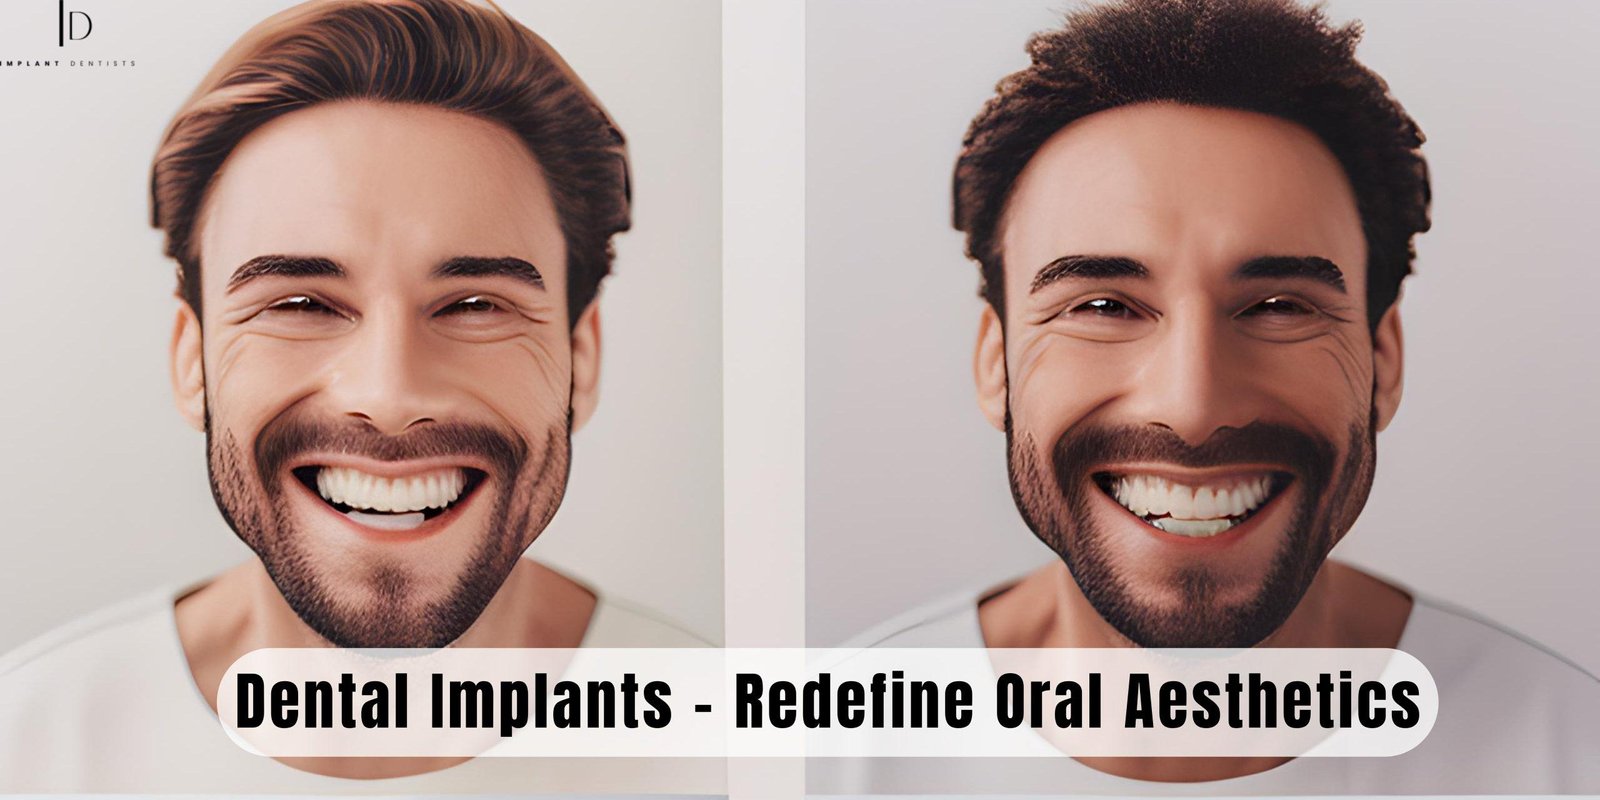 From Gaps to Grins: How Dental Implants Redefine Oral Aesthetics